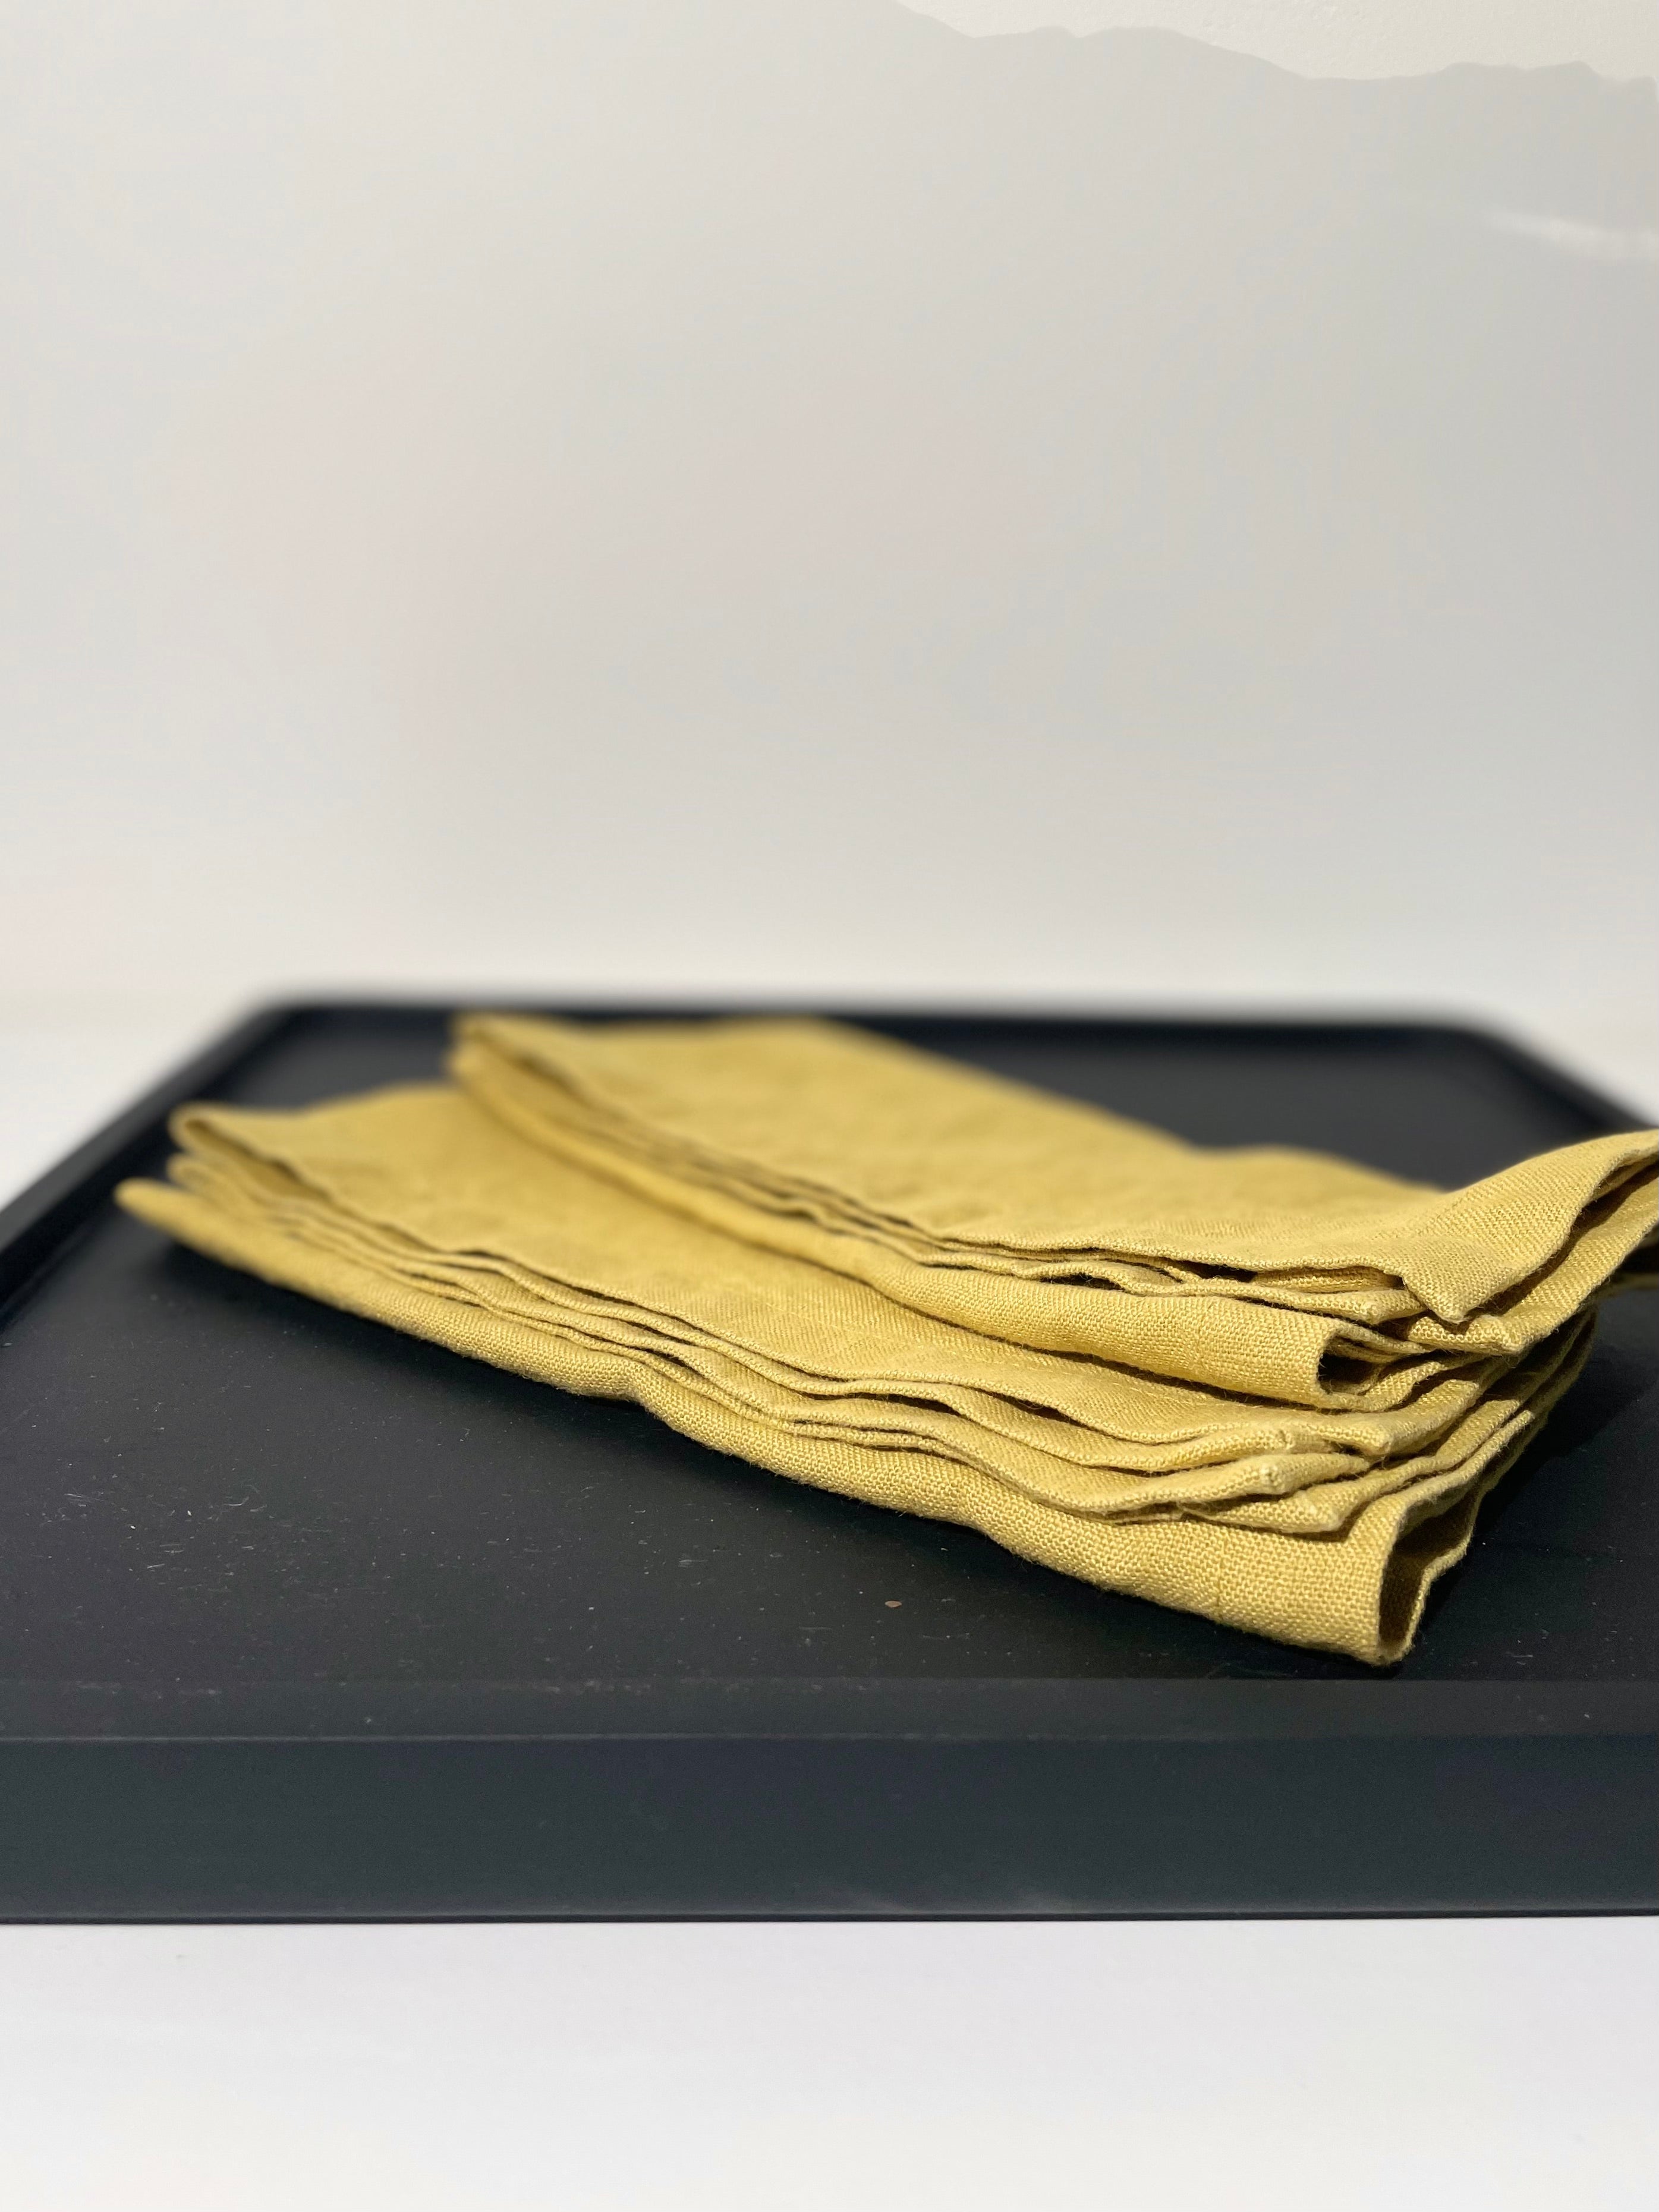 Curry-yellow linen napkins - set of 4